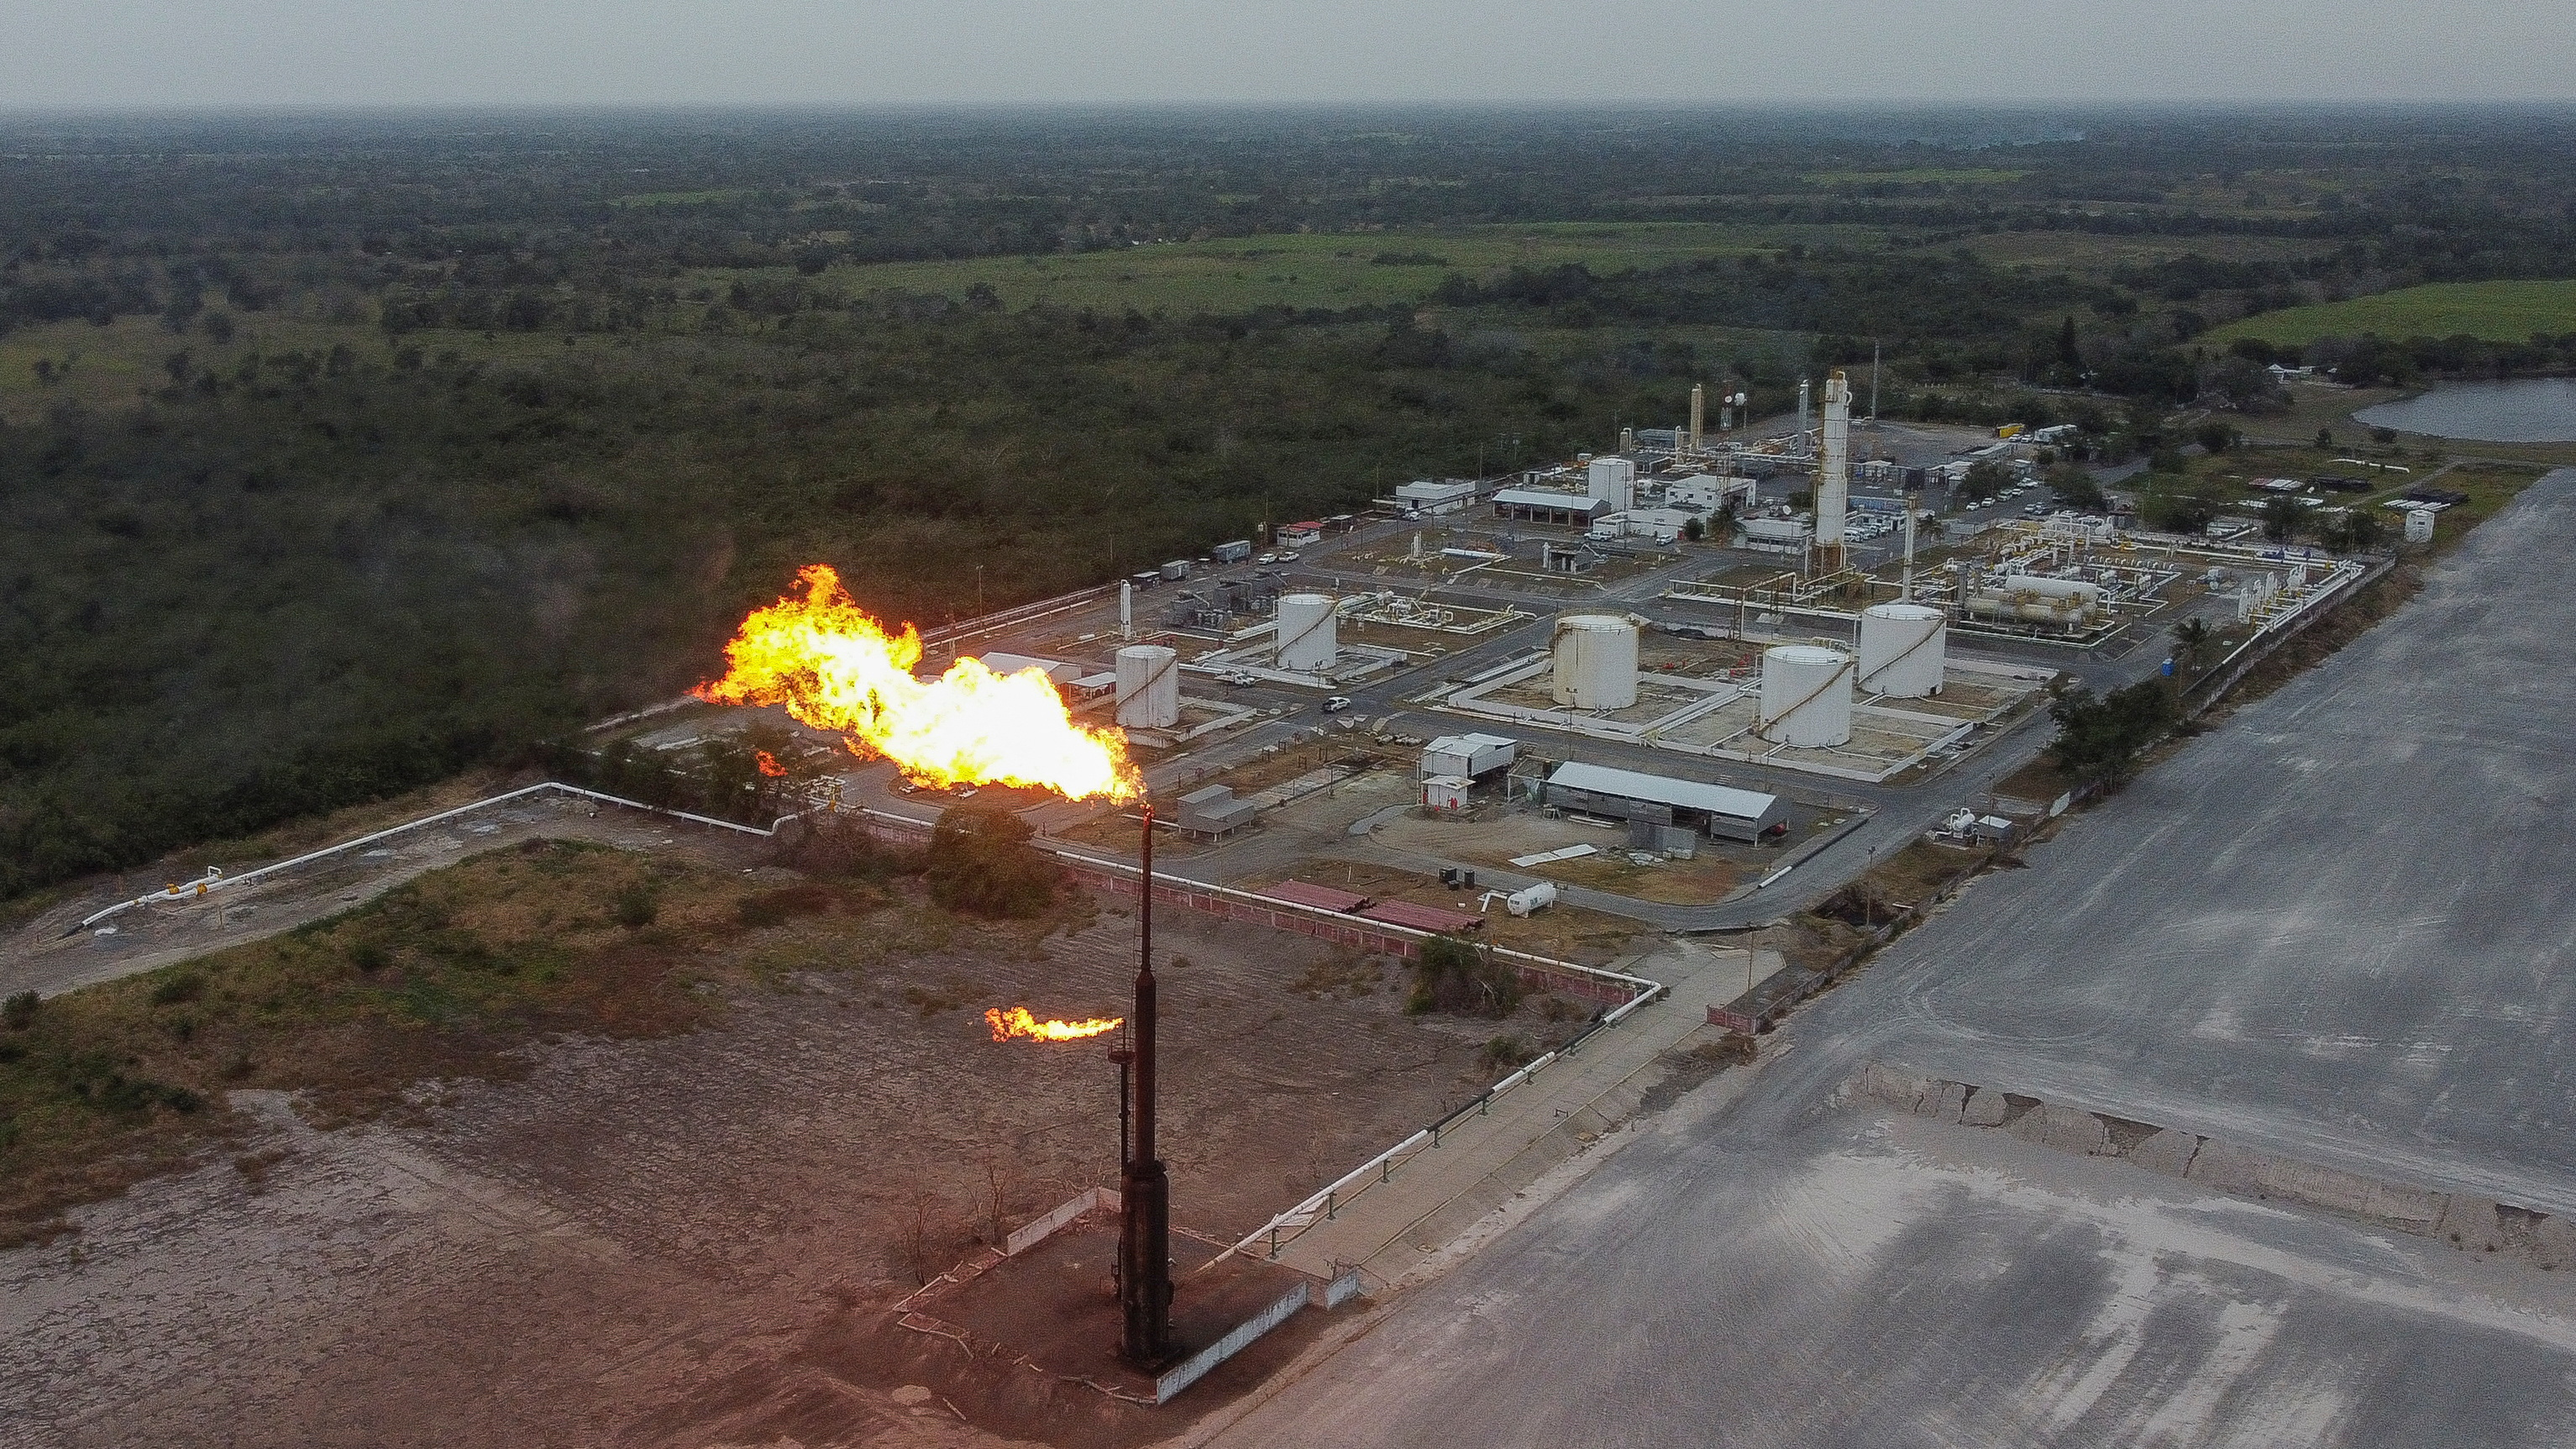 Gas flares are seen at the state energy company Petroleos Mexicanos (Pemex) plants in Veracruz state